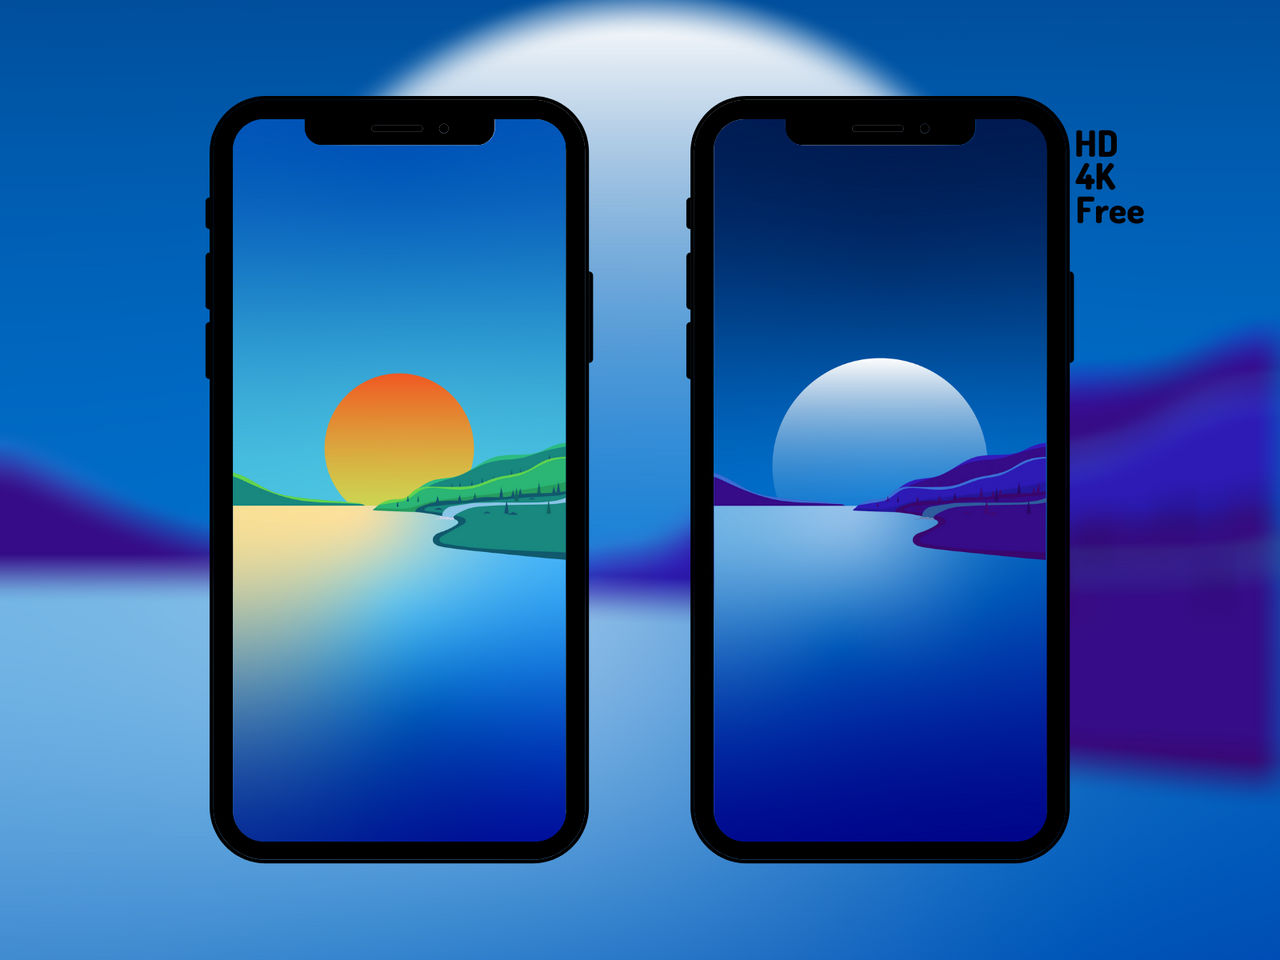 Phone wallpapers - Day and night minimalist view by jorgehardt on DeviantArt